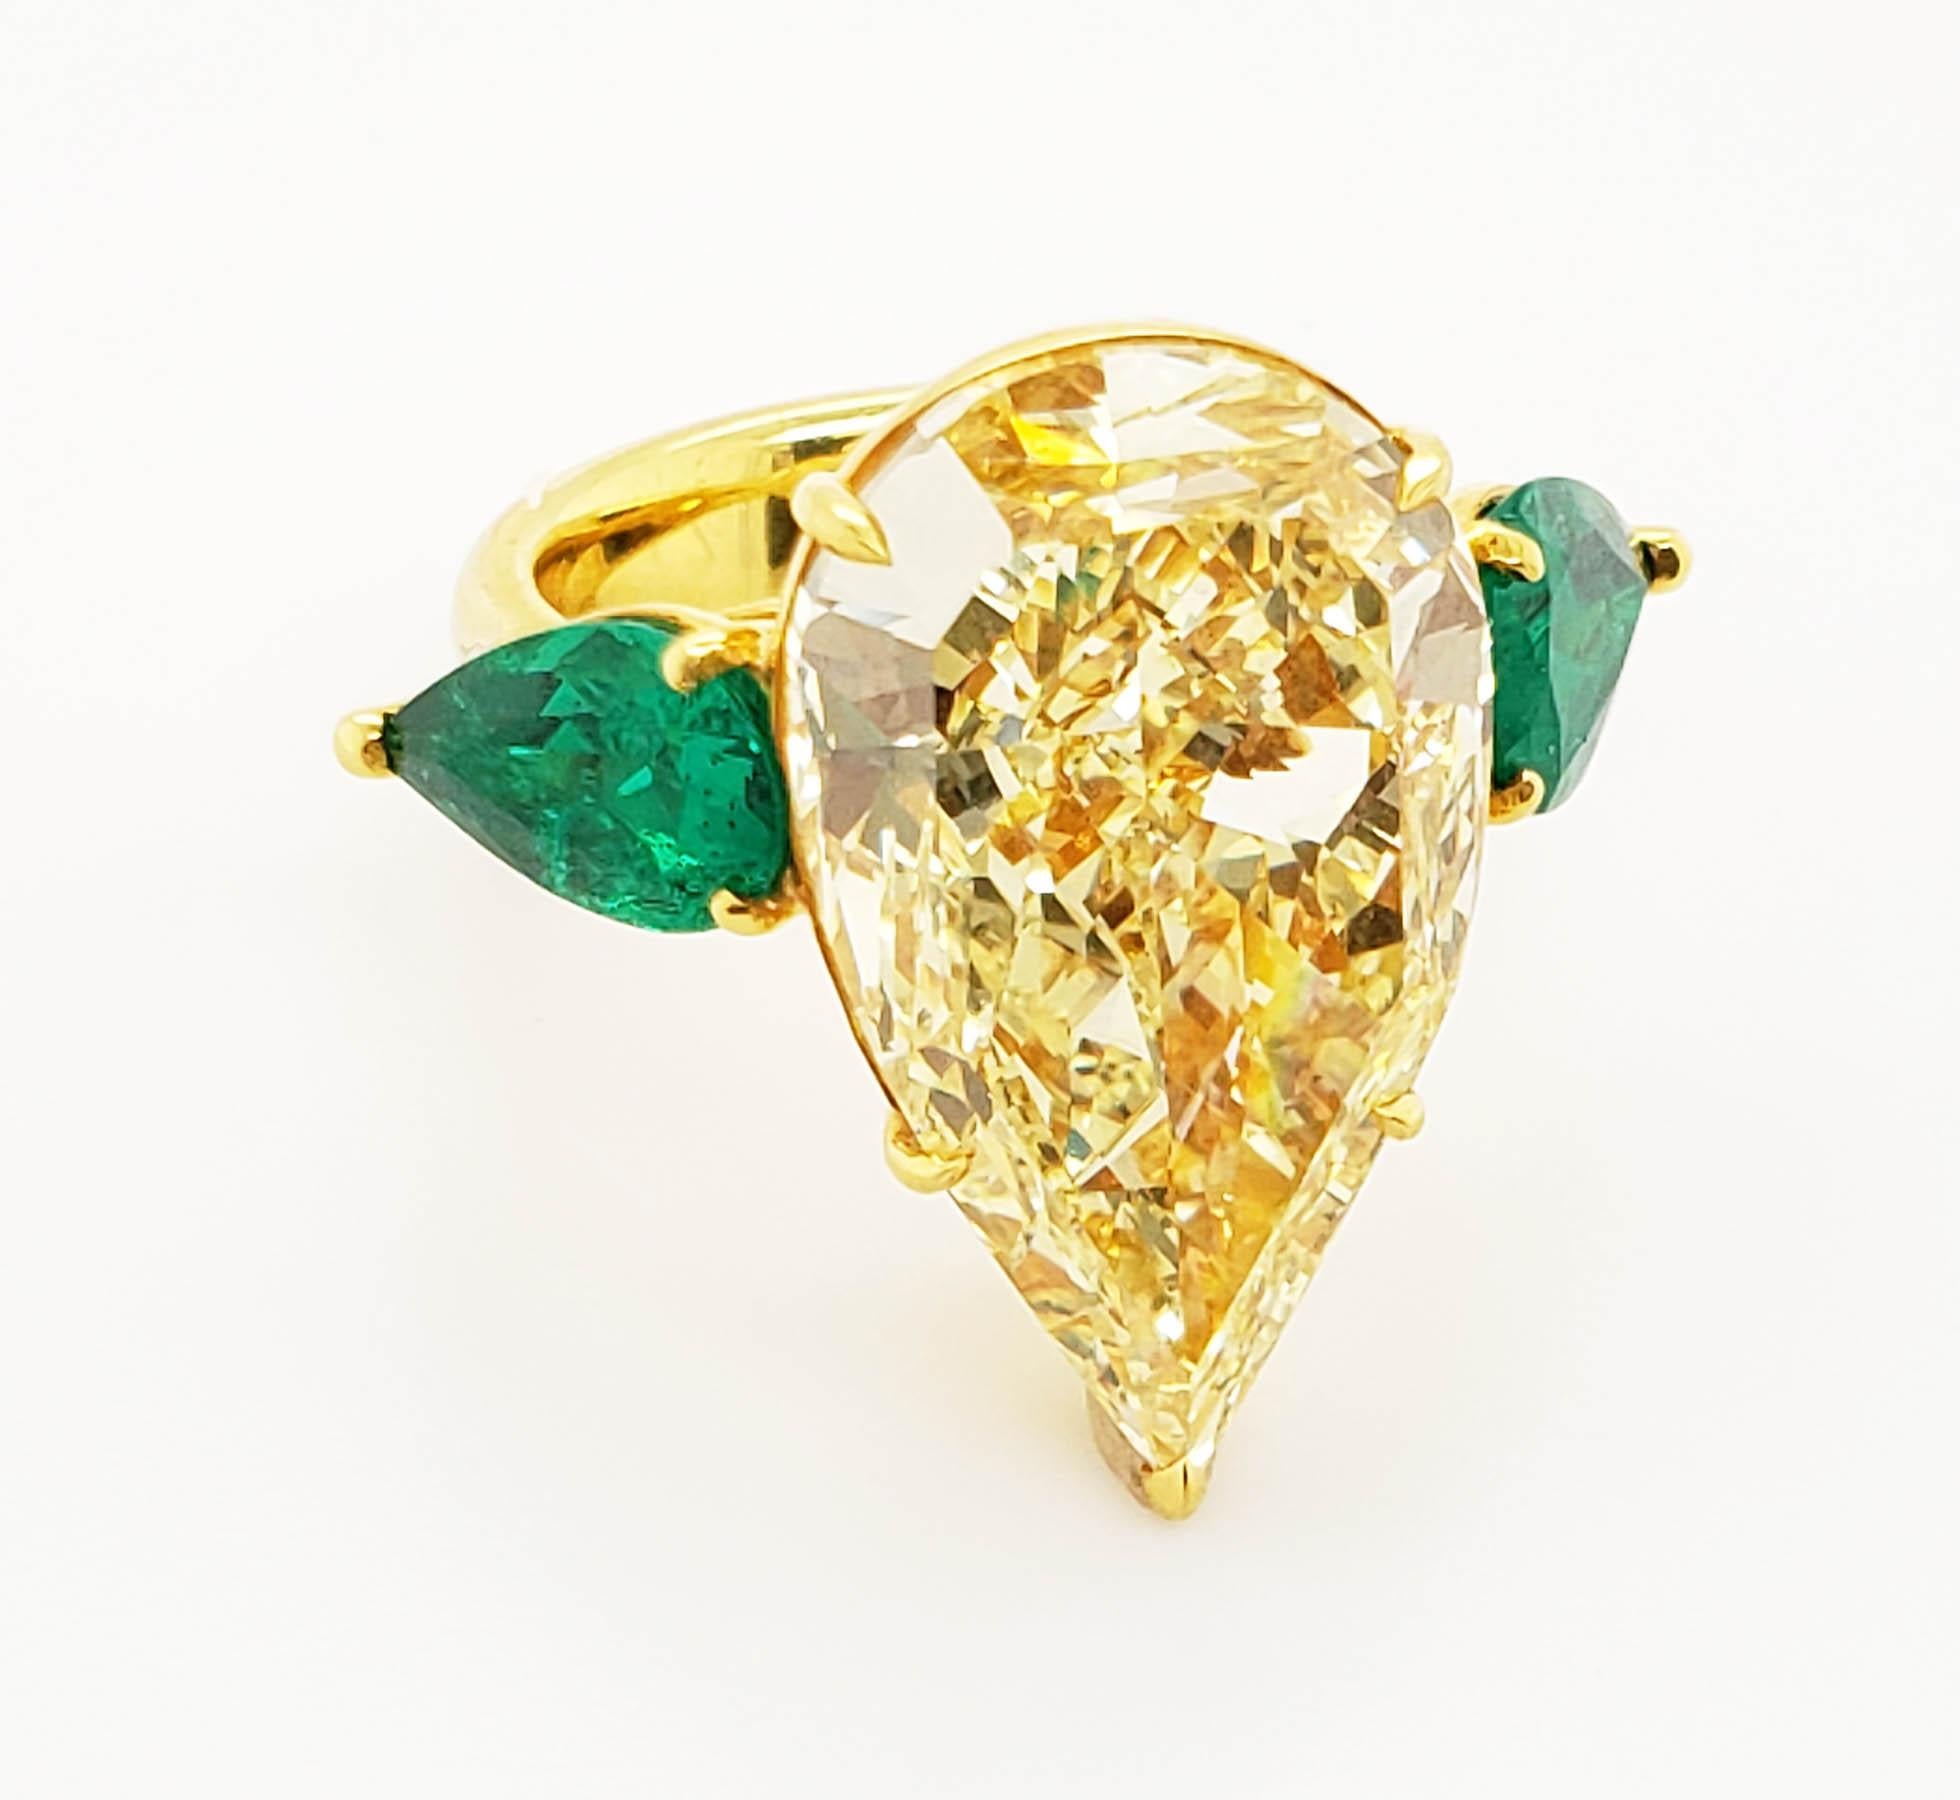 From SCARSELLI, this 13.93 carat Fancy Yellow Pear shape Cut Diamond is GIA Graded VS2 clarity. The diamond is flanked by a pair of pear shape Colombian emeralds 2.38 carats together F-G color VS+ clarity. This ring may be sized with Scarselli to